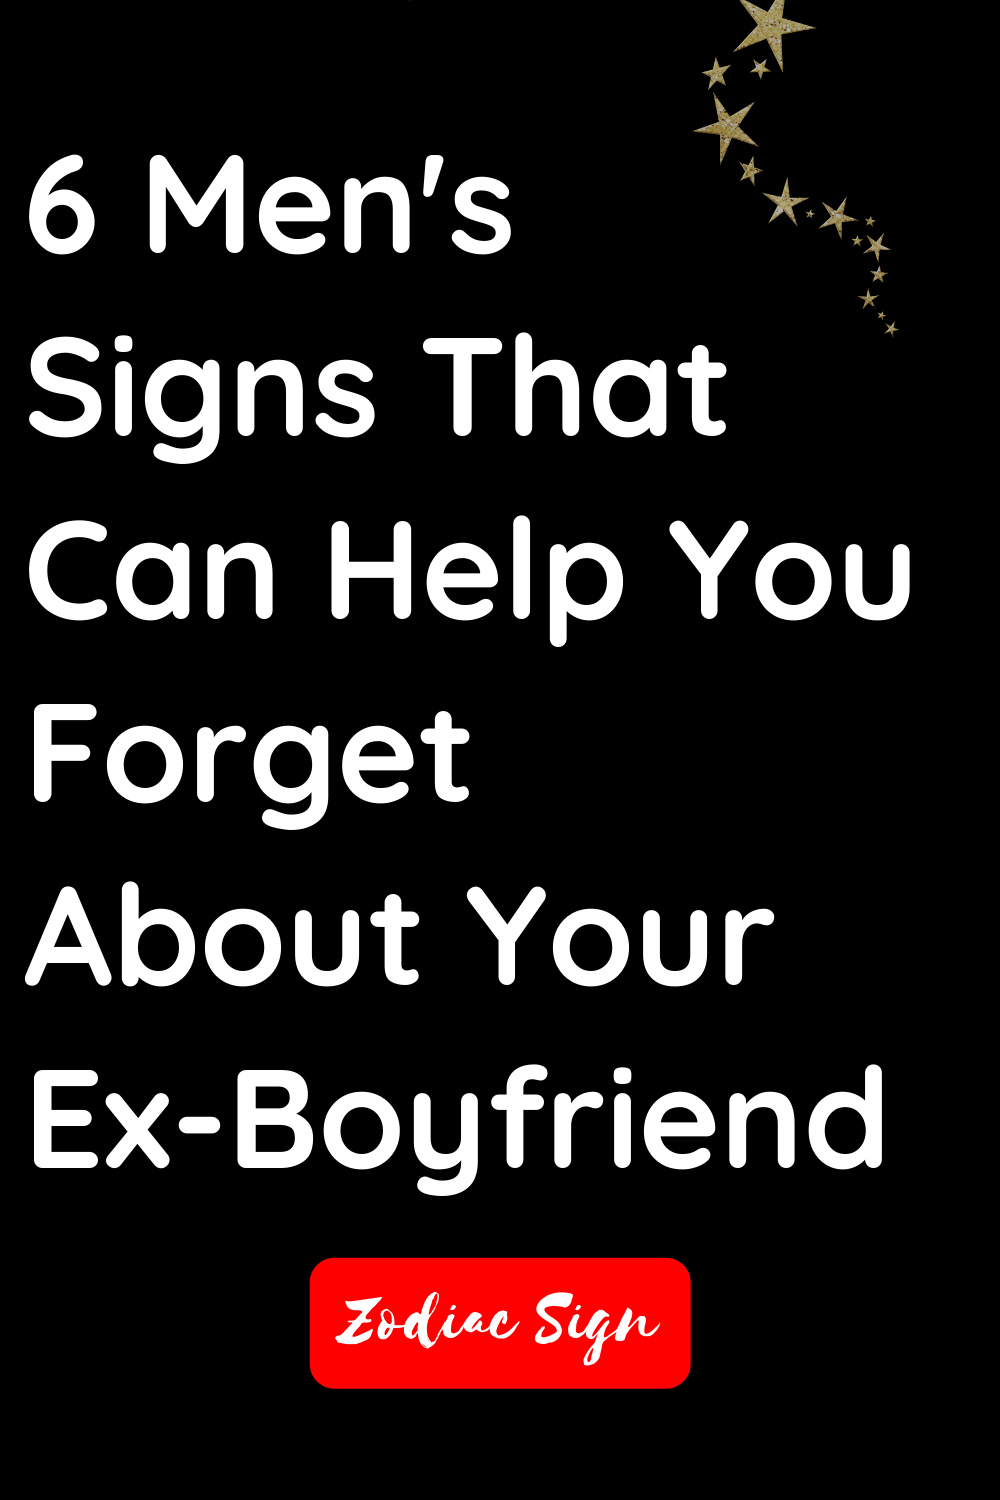 6 men's signs that can help you forget about your ex-boyfriend